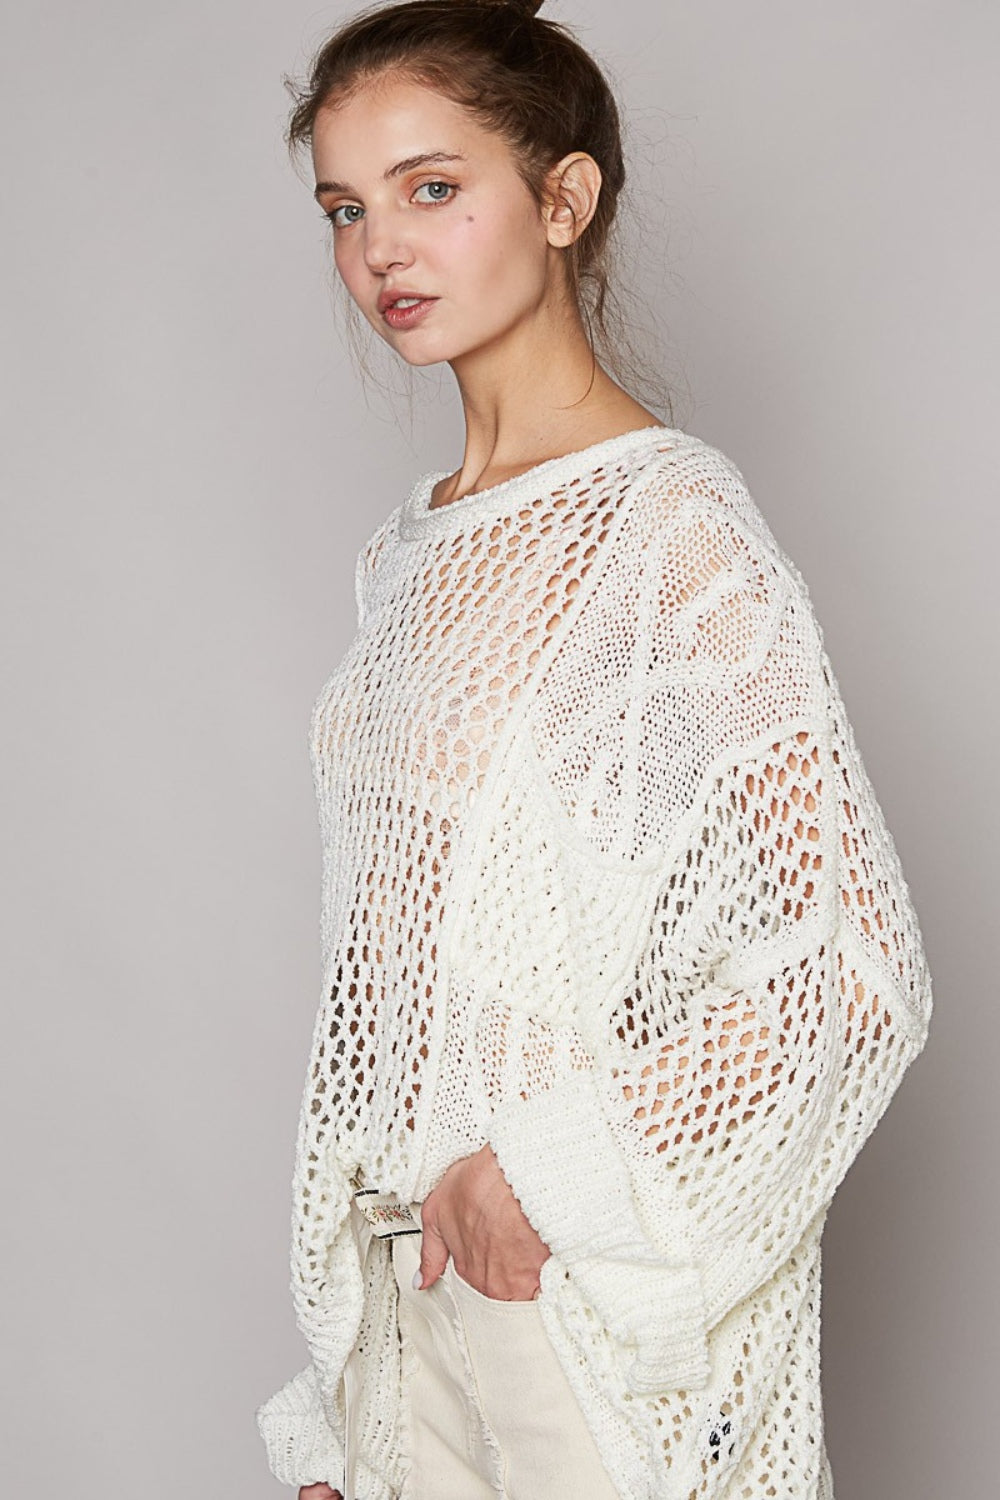 POL Openwork Long Sleeve Knit Cover Up top